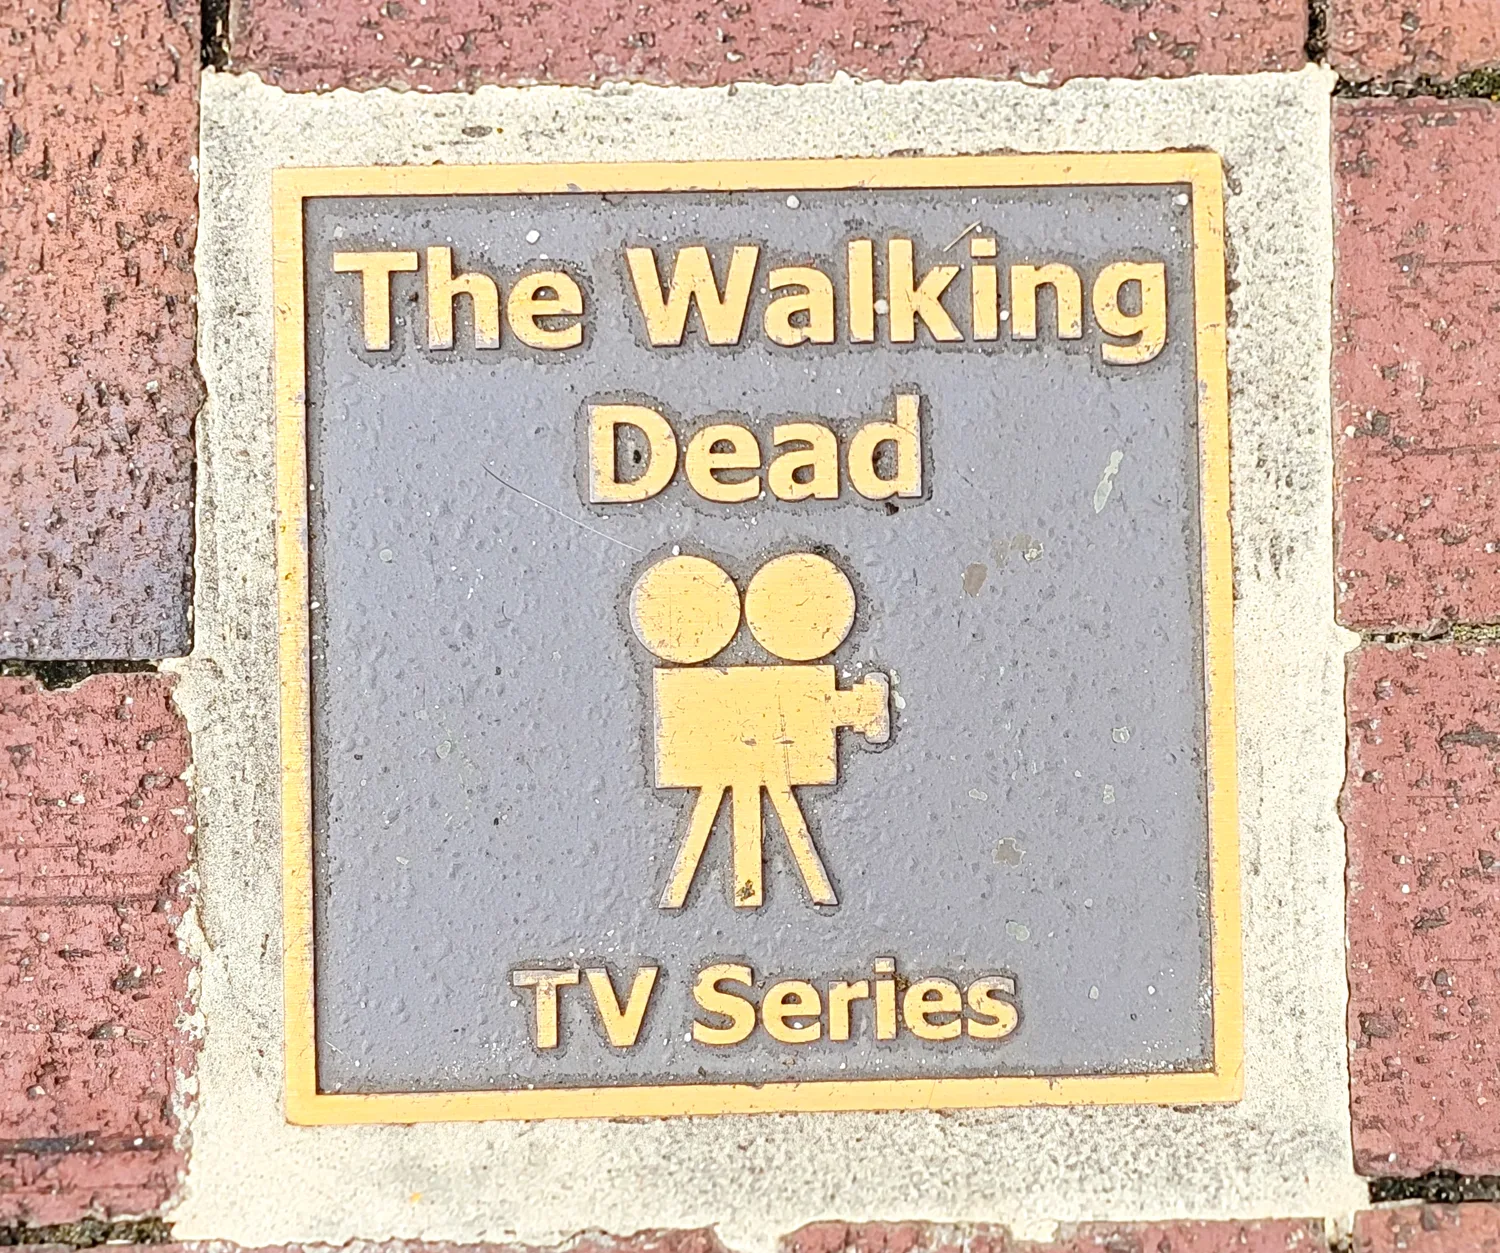 The Walking Dead town path paver showing famous filming locations in georgia